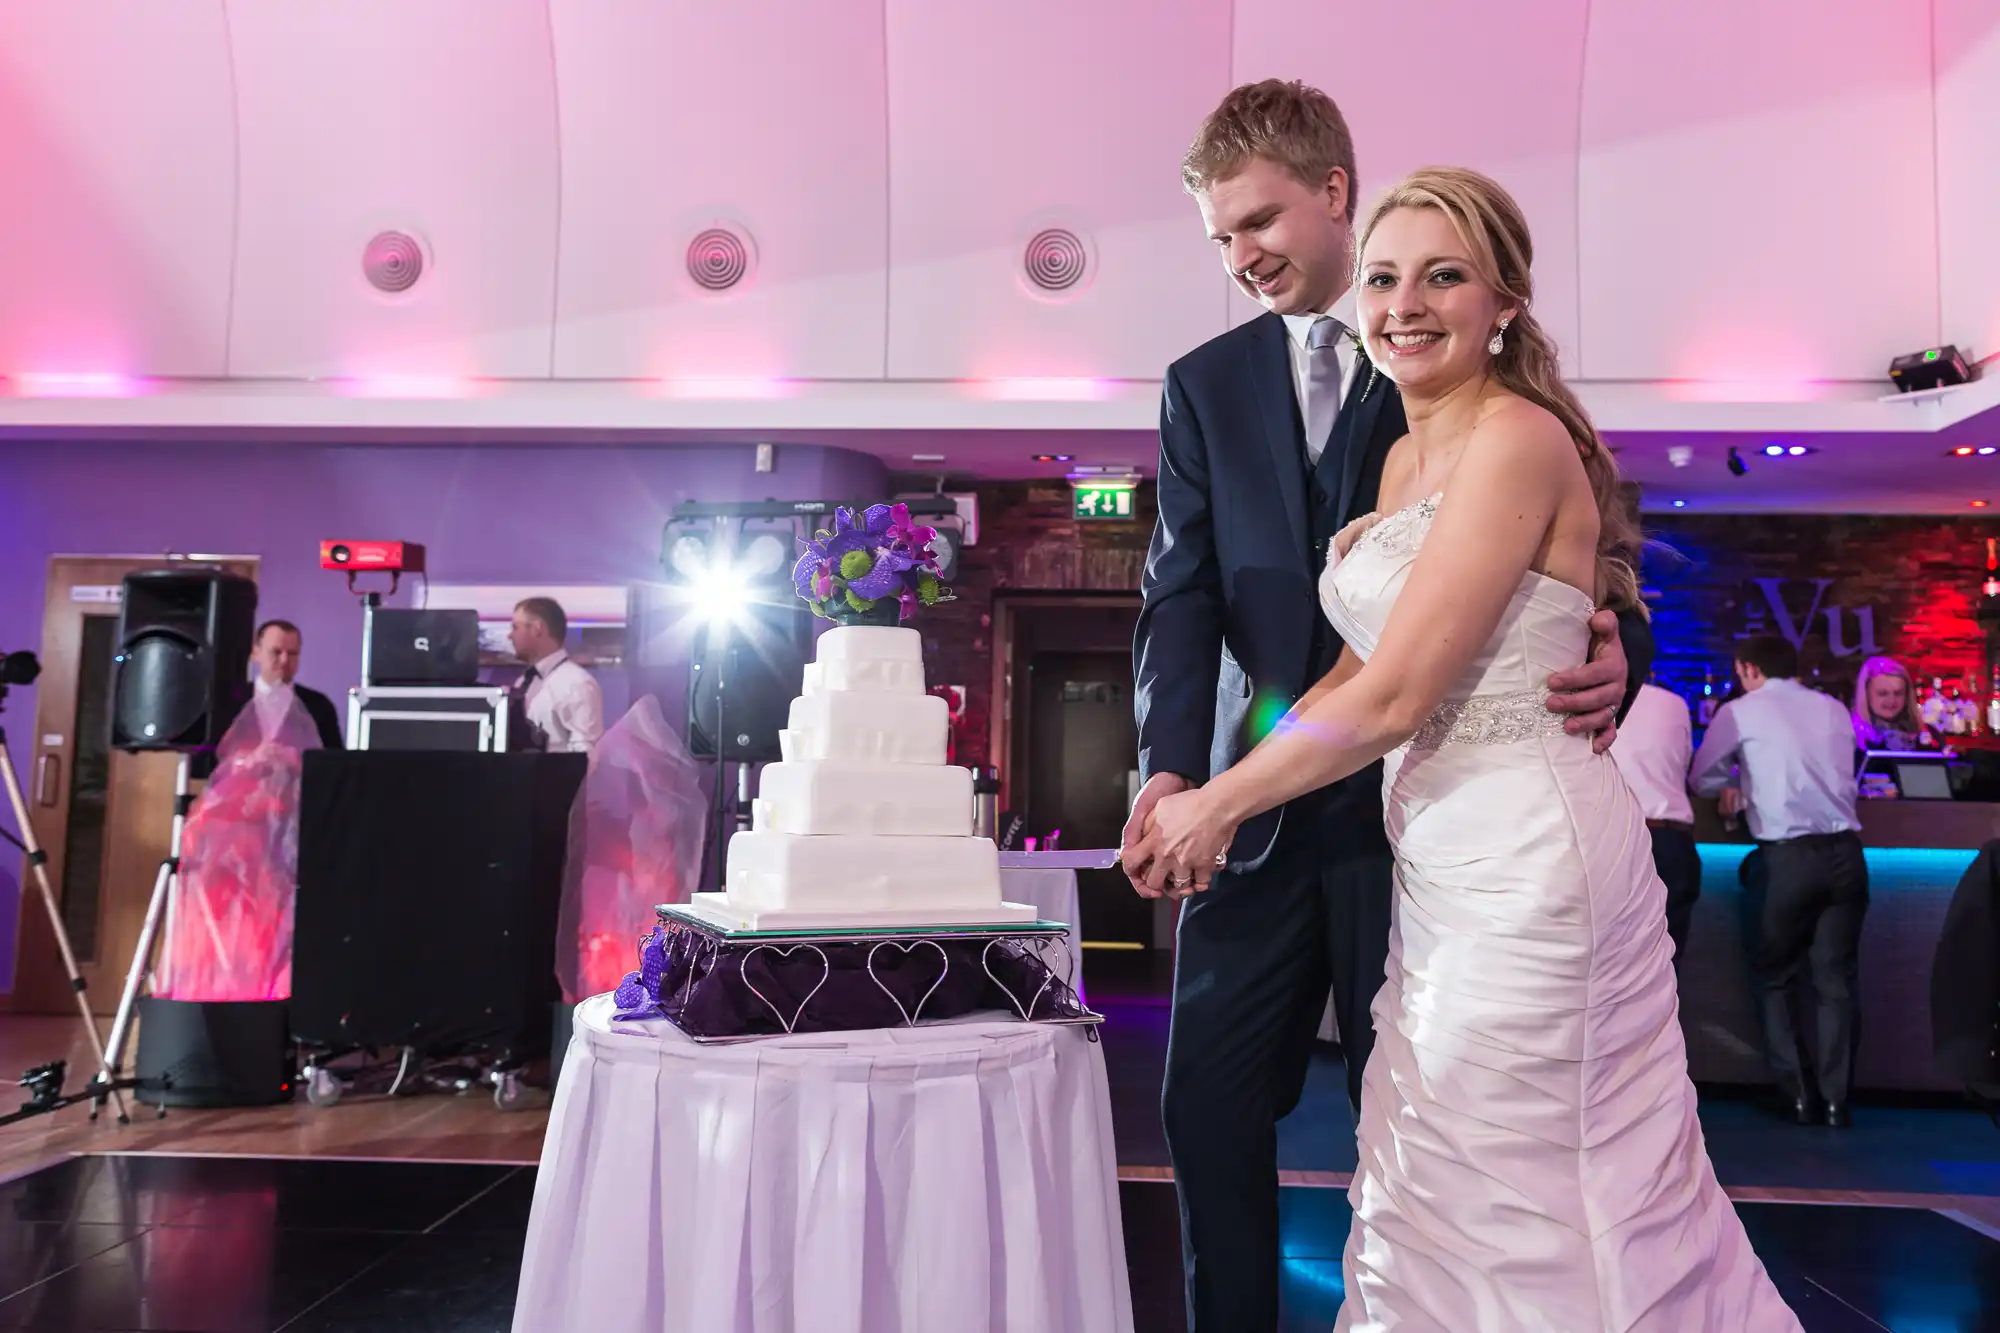 A bride and groom smiling while cutting a multi-tiered wedding cake at a reception hall with purple lighting and a dj booth in the background.